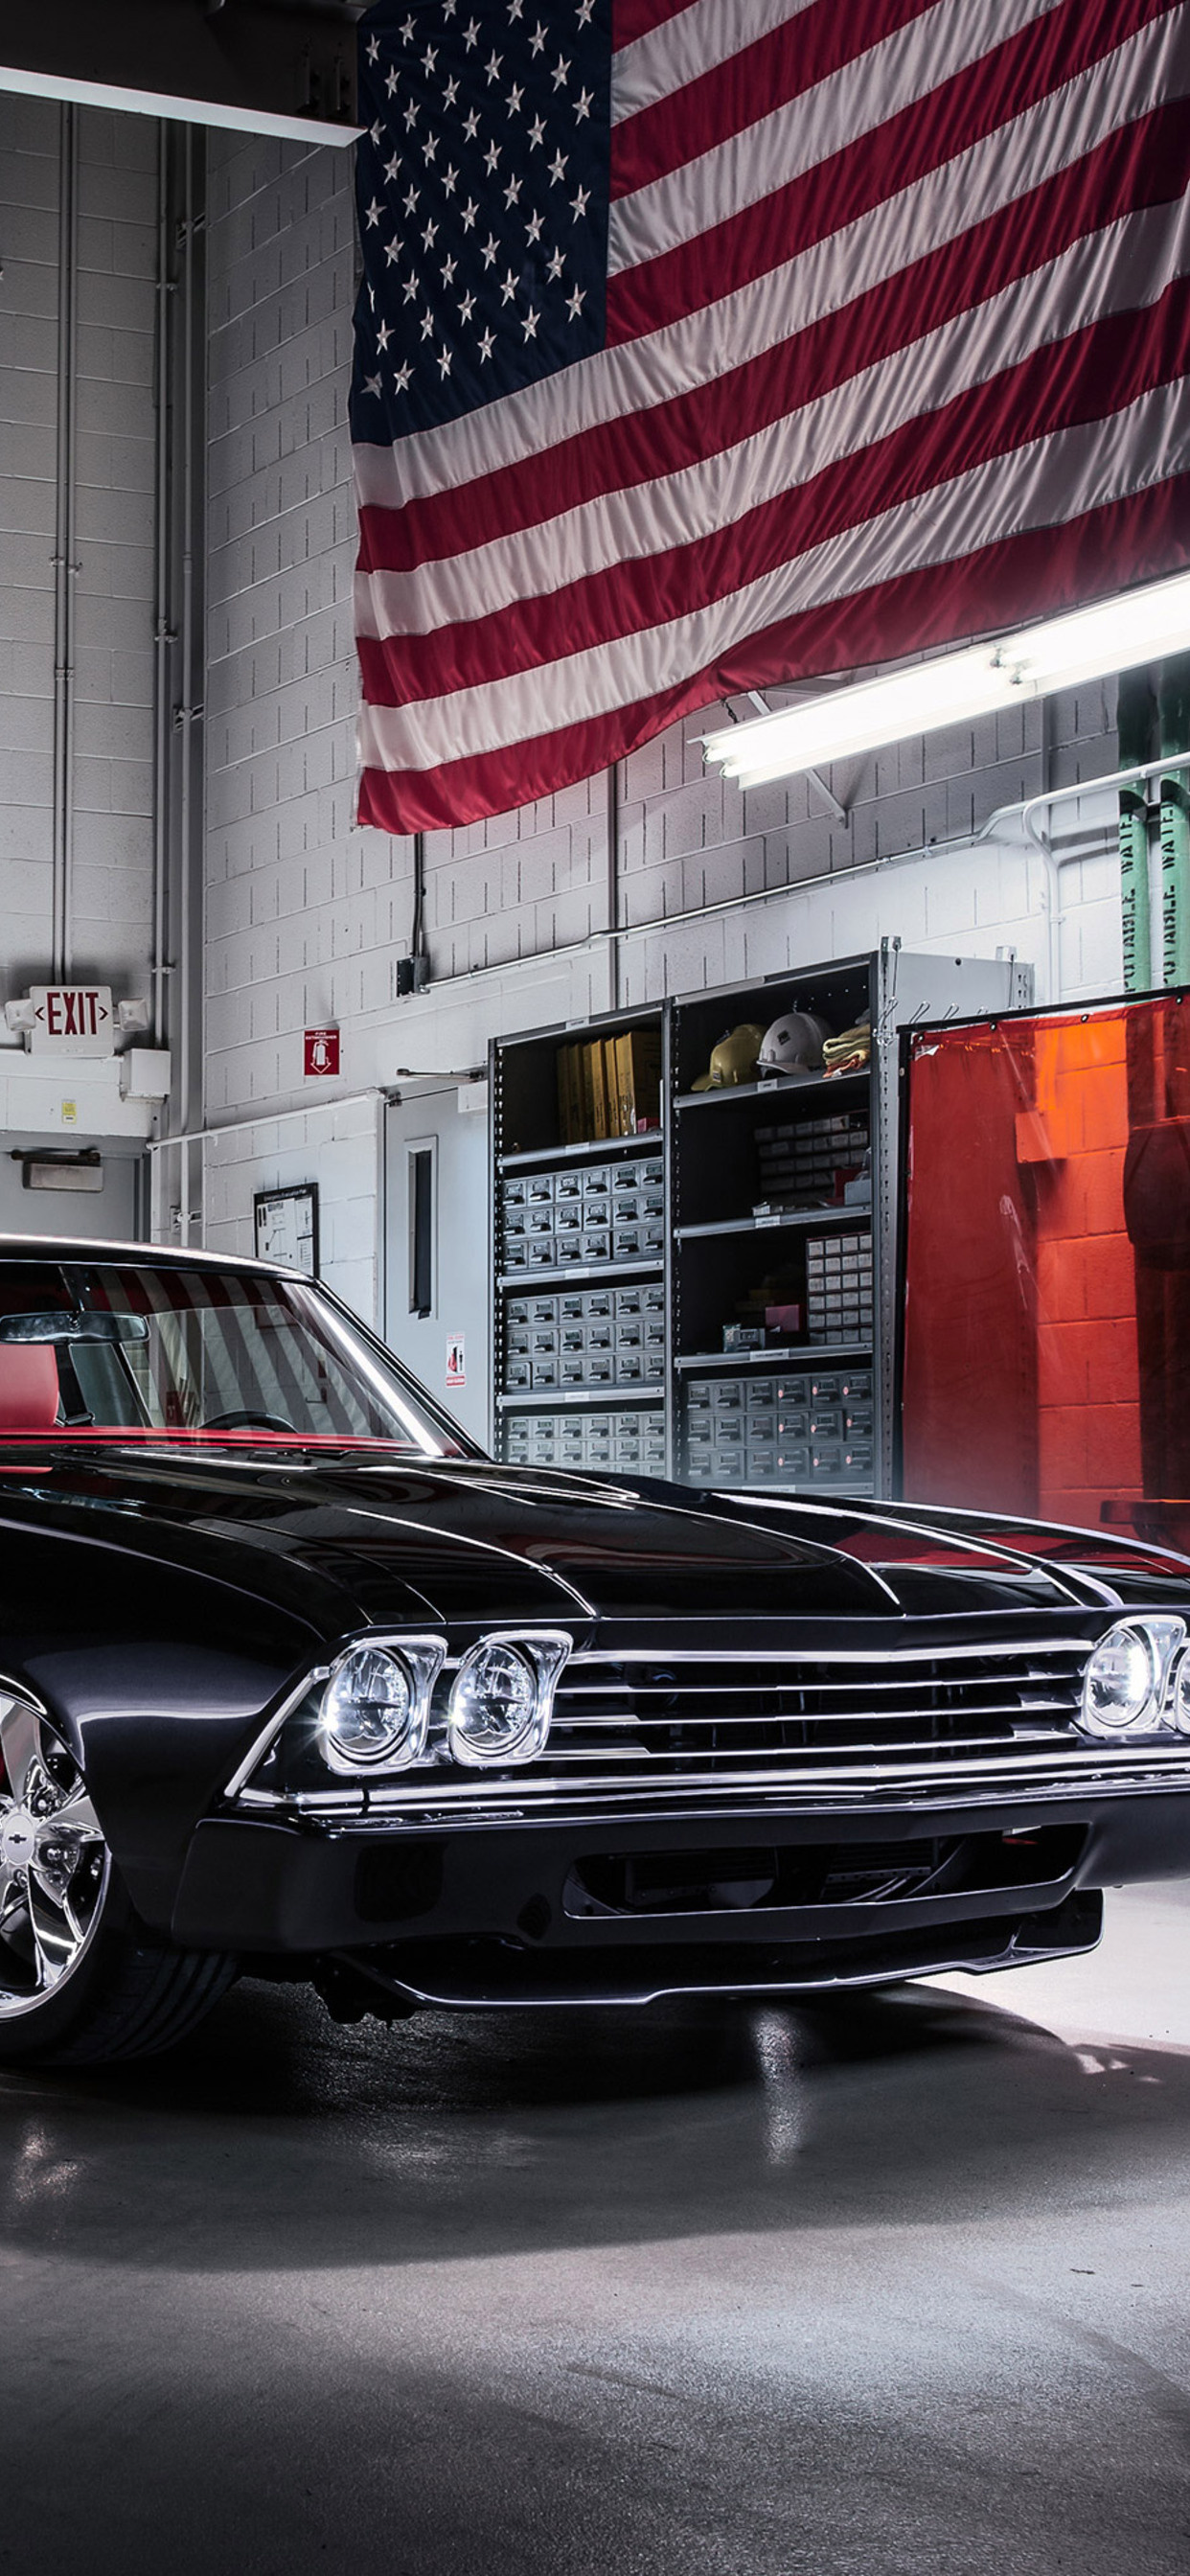 Chevelle drive legacy, Muscle car craftsmanship, Historic Chevy marque, Performance vehicle, Iconic design, 1250x2690 HD Handy